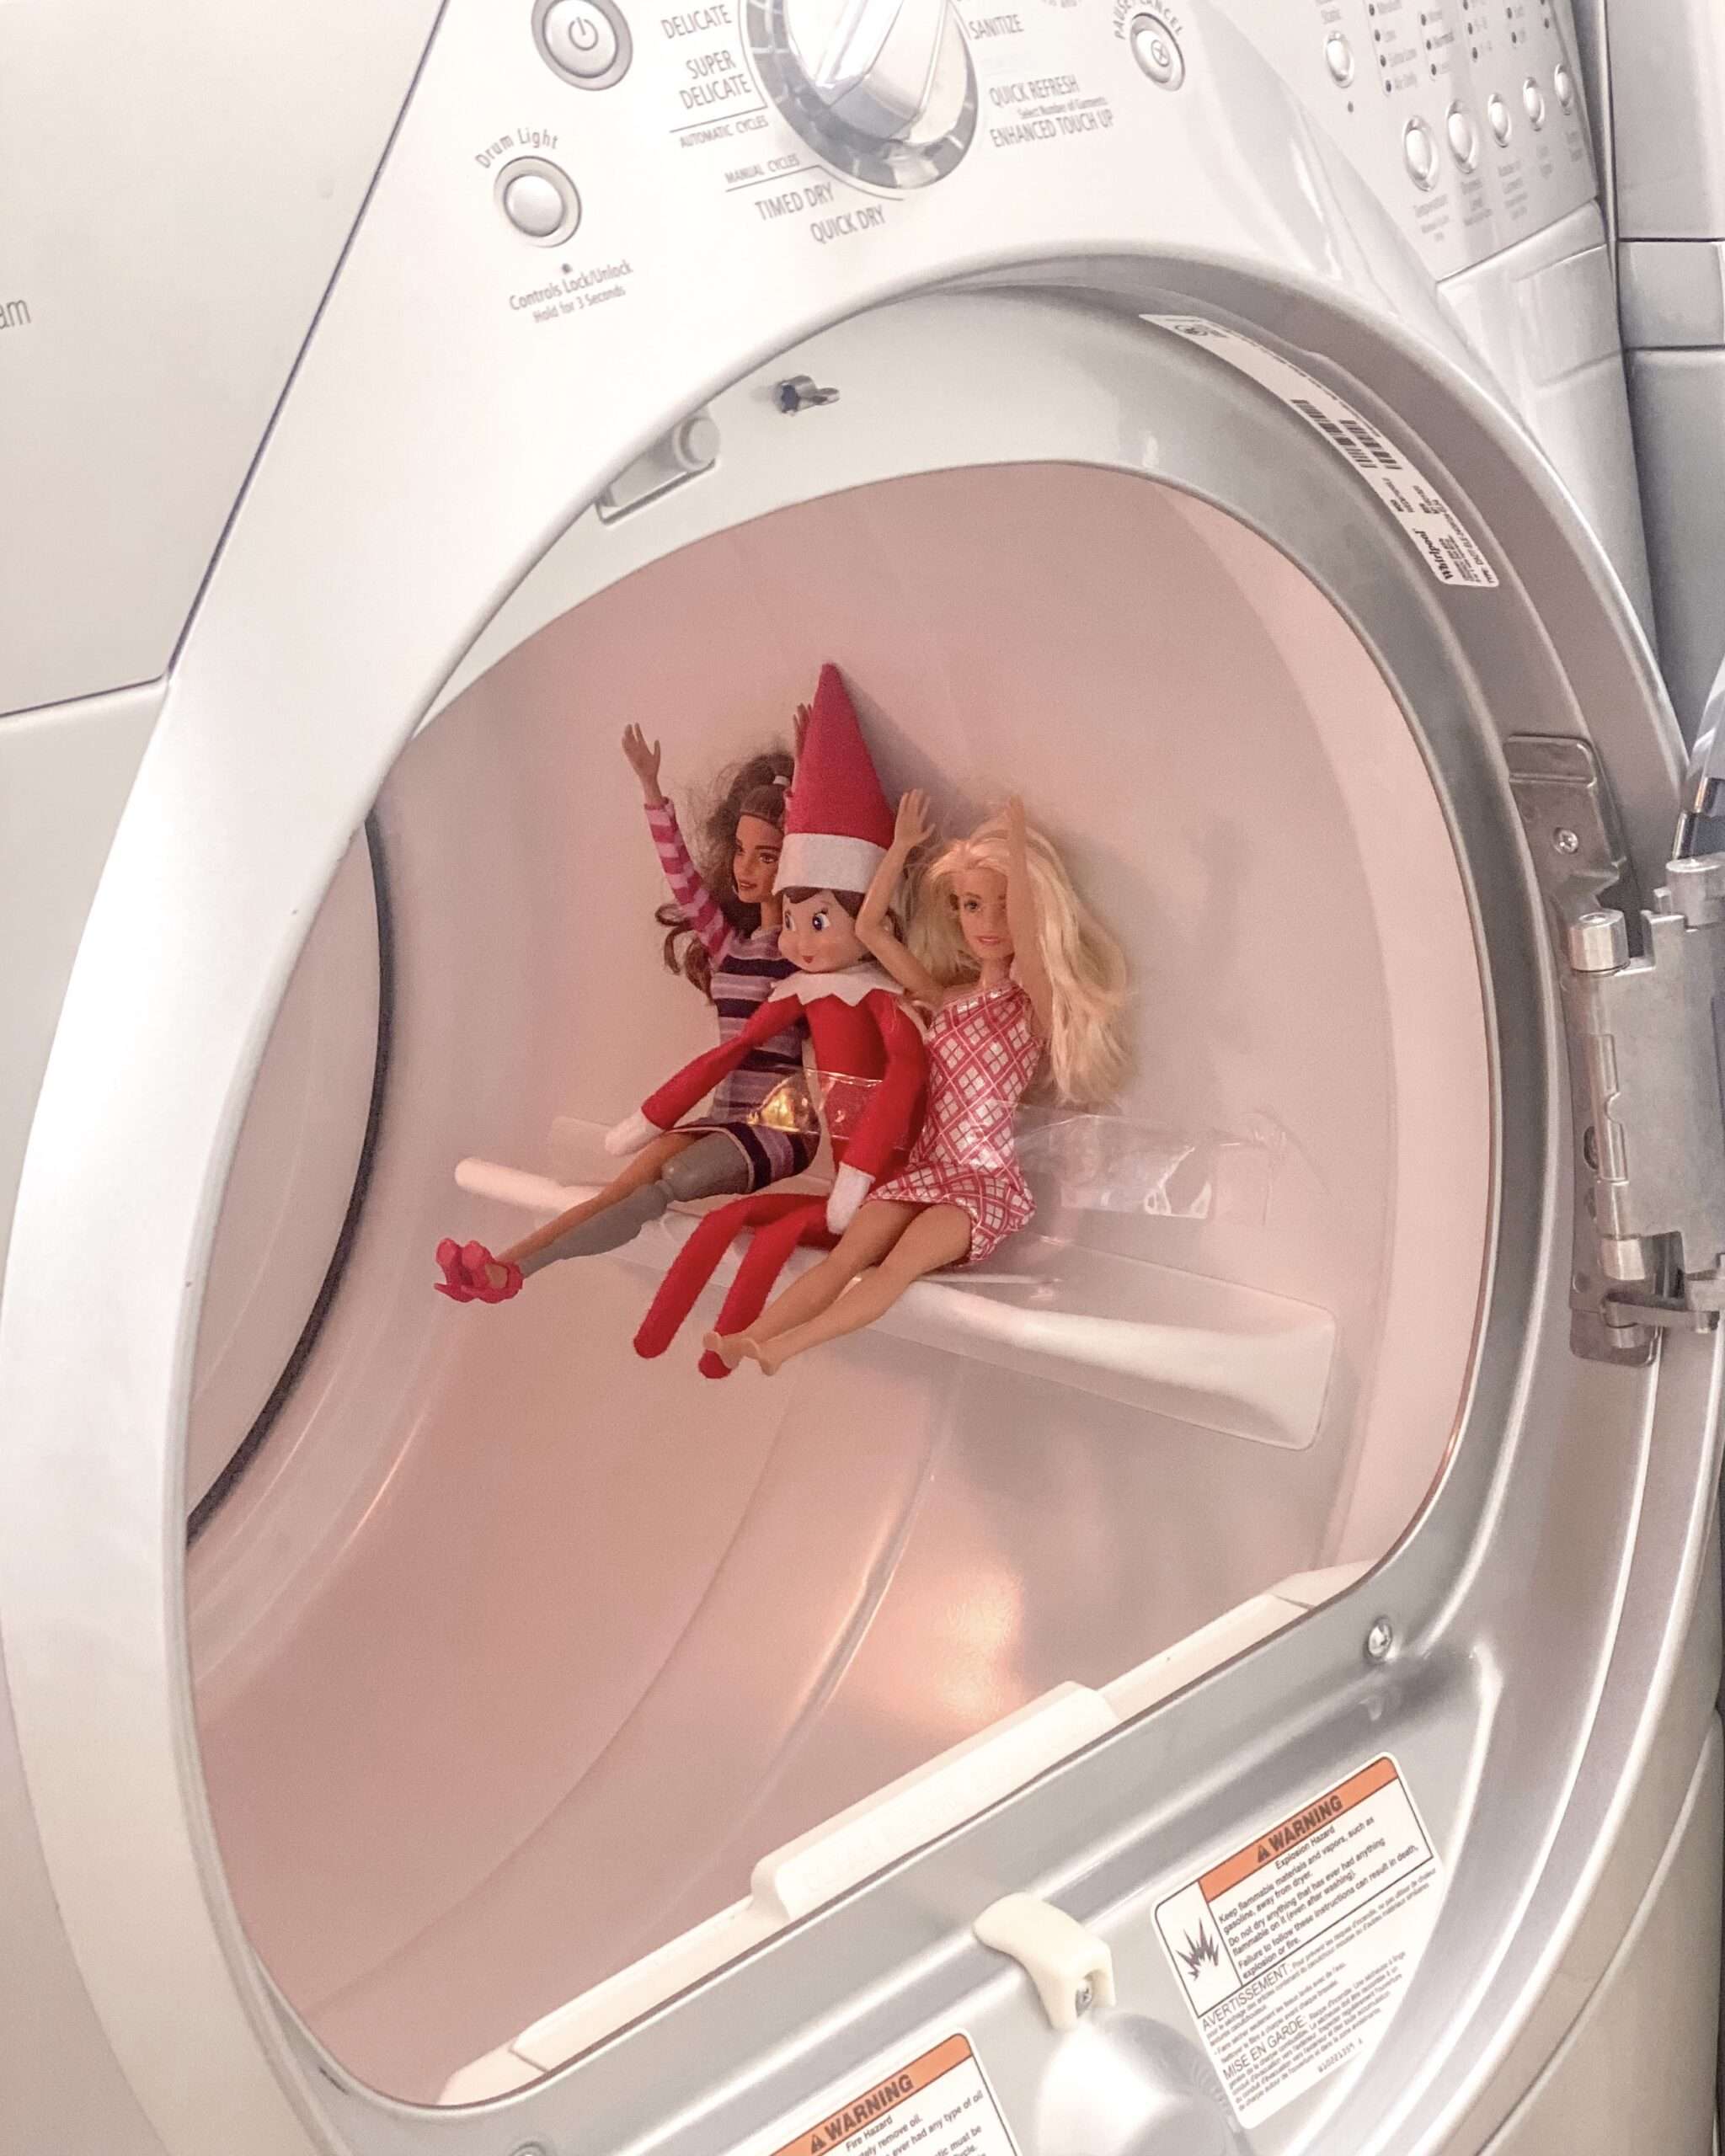 Turn your laundry room into an amusement park for your elf. Fun & easy Elf on the Shelf ideas for your toddler or little kid. Elf swinging on a roll of toilet paper. Quick to setup and lots of naughty and nice ideas, perfect to bring some Christmas magic to your home. #ElfOnTheShelf #ElfIdeas #ElfOnTheShelfIdeas #Christmas #ChristmasMagic